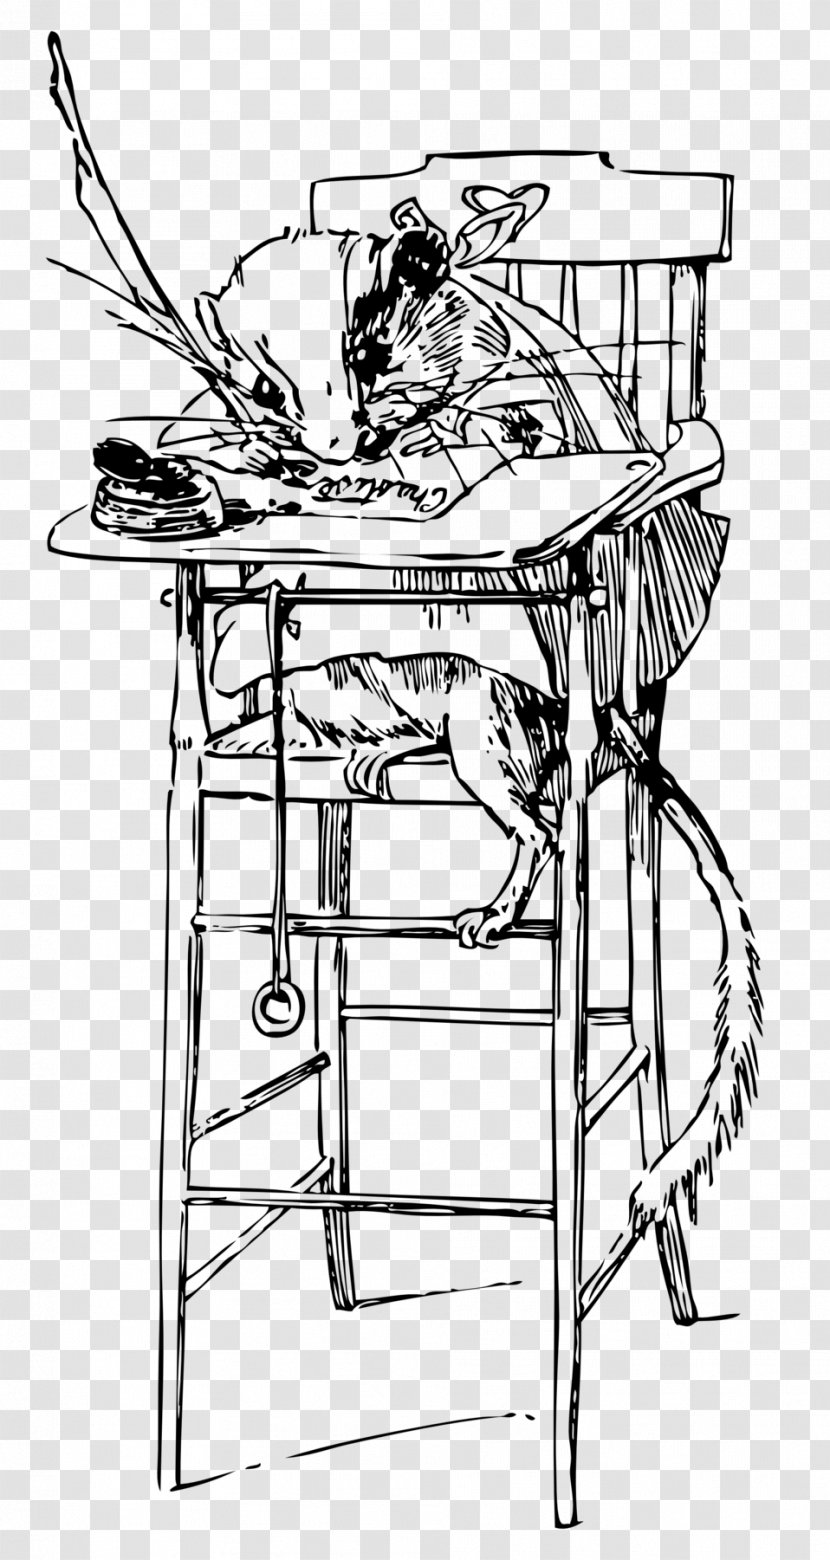 Clip Art - Black And White - The Cat Sitting On Chair Transparent PNG